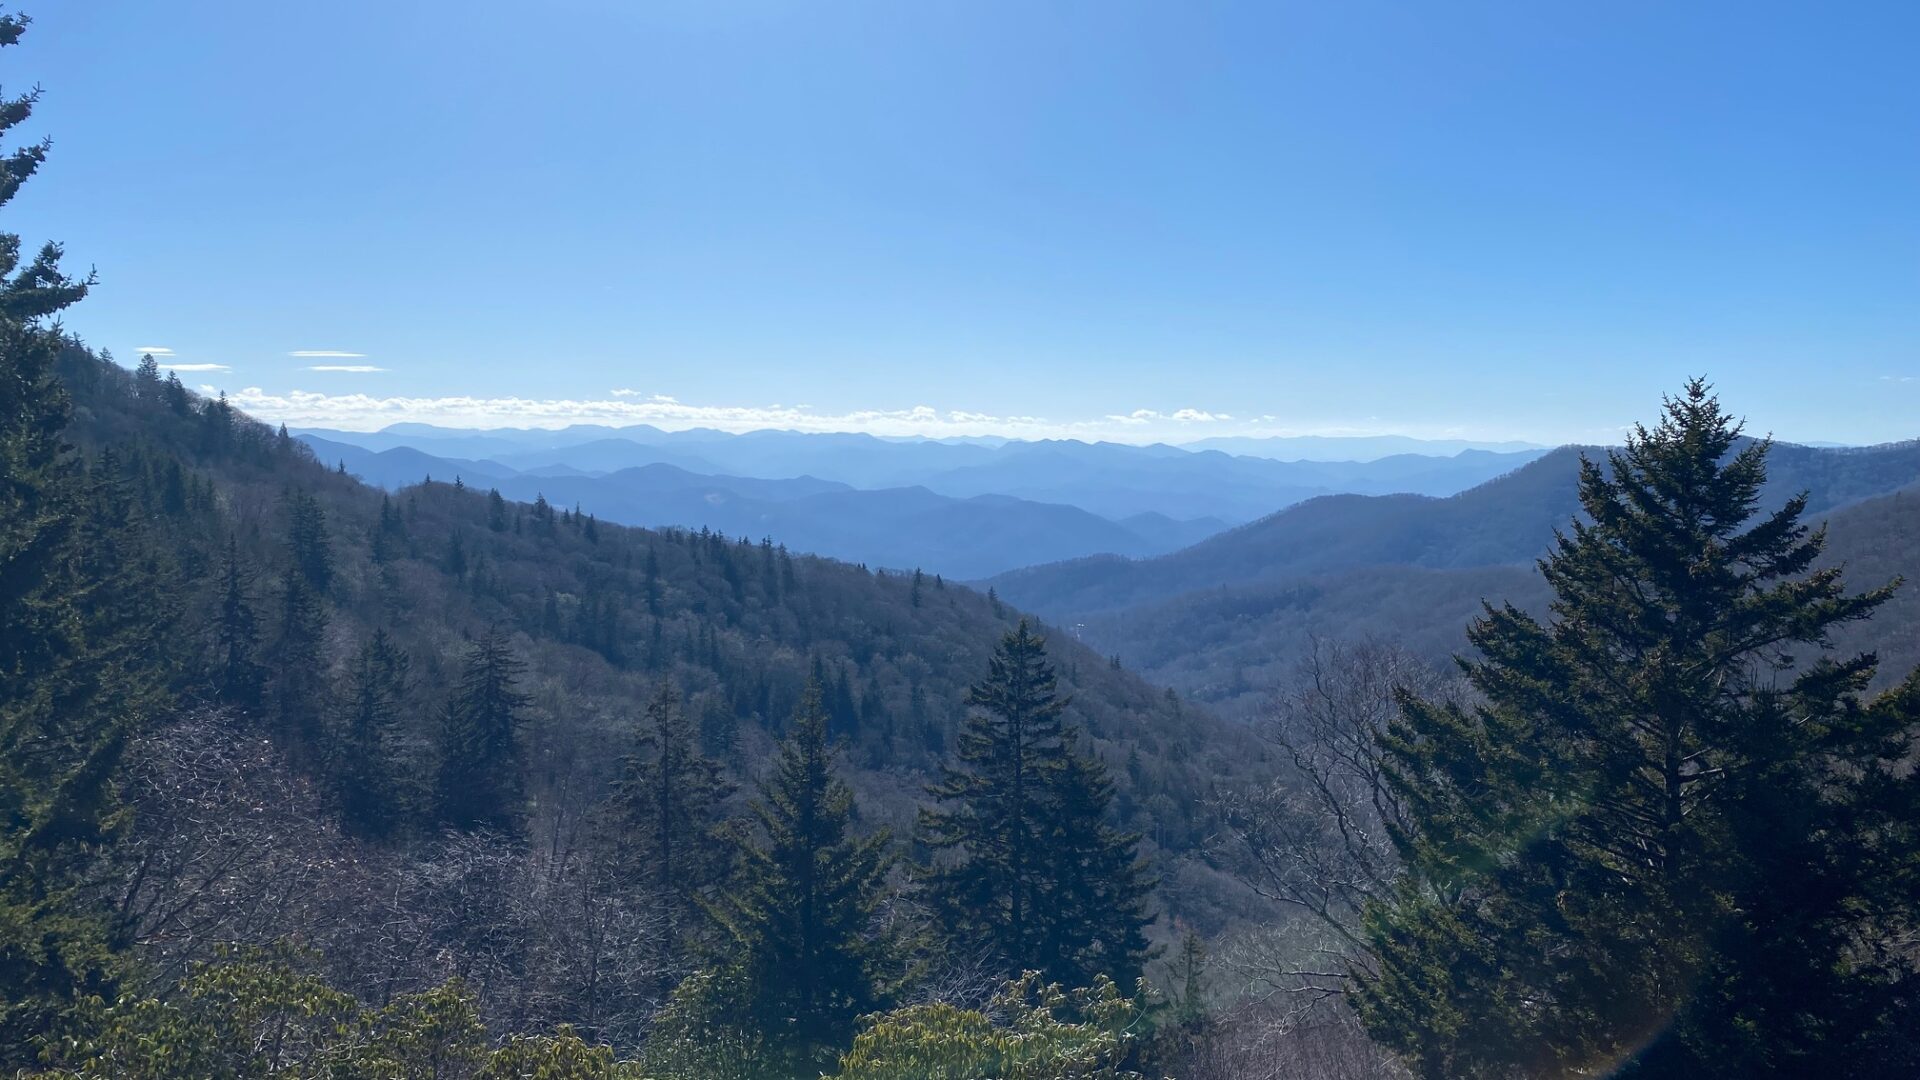 Exploring the Southern Blue Ridge Parkway